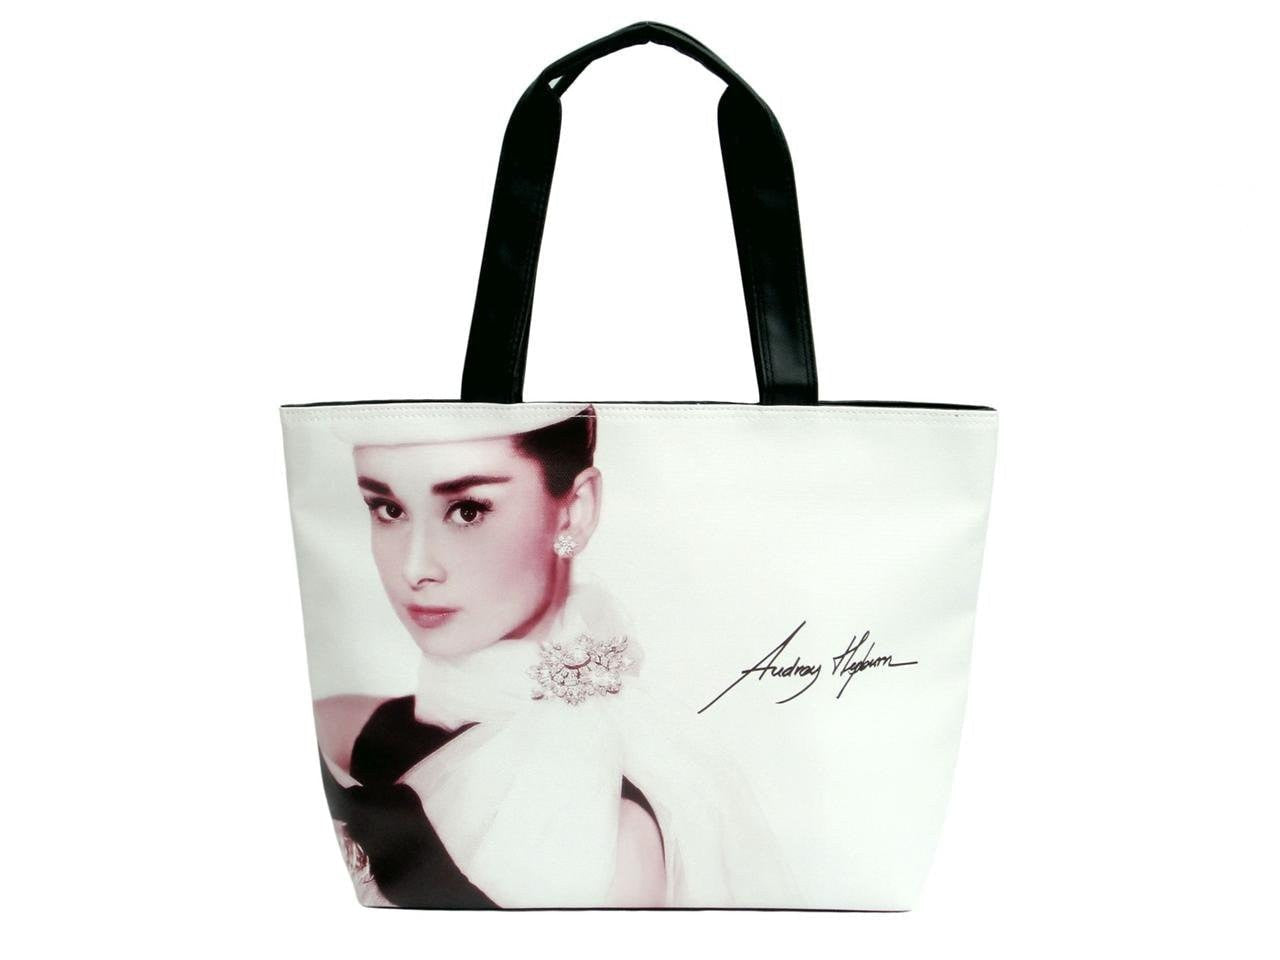 Audrey Hepburn Wide Tote Bag with Signature - SilverMania925